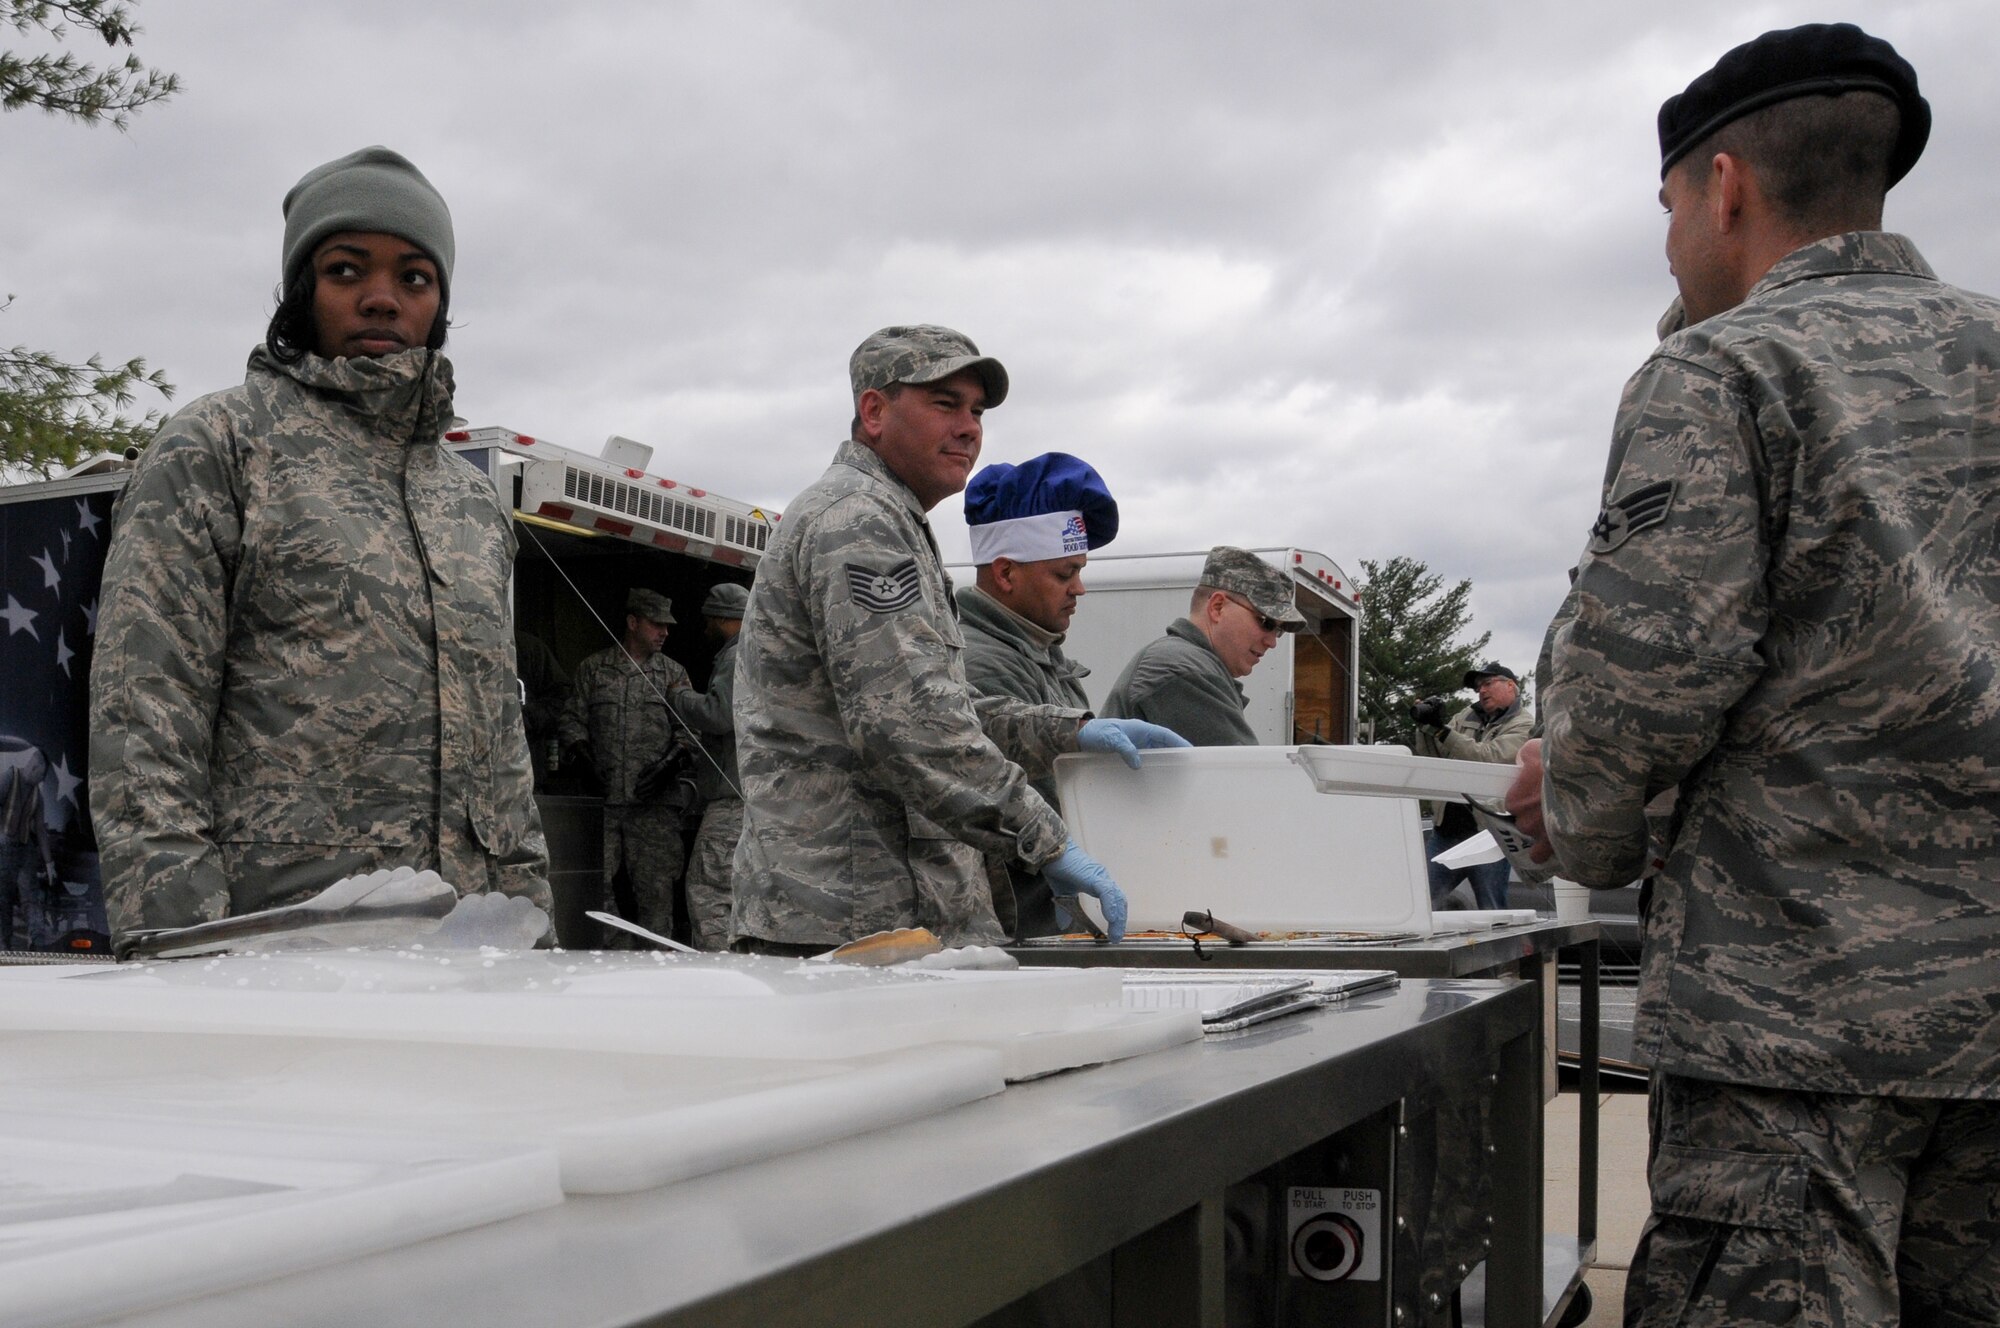 Airman from the 113th Force Support Squadron set up a new mobile field kitchen during a demonstration at Joint Base Andrews, Md., Nov. 3. The Disaster Relief Mobile Kitchen Trailer  can deploy to natural disaster sites to provide hot meals to relief workers and Airmen working in austere conditions. (U.S. Air force photo by Airman 1st Class Sumena Leslie/Released)